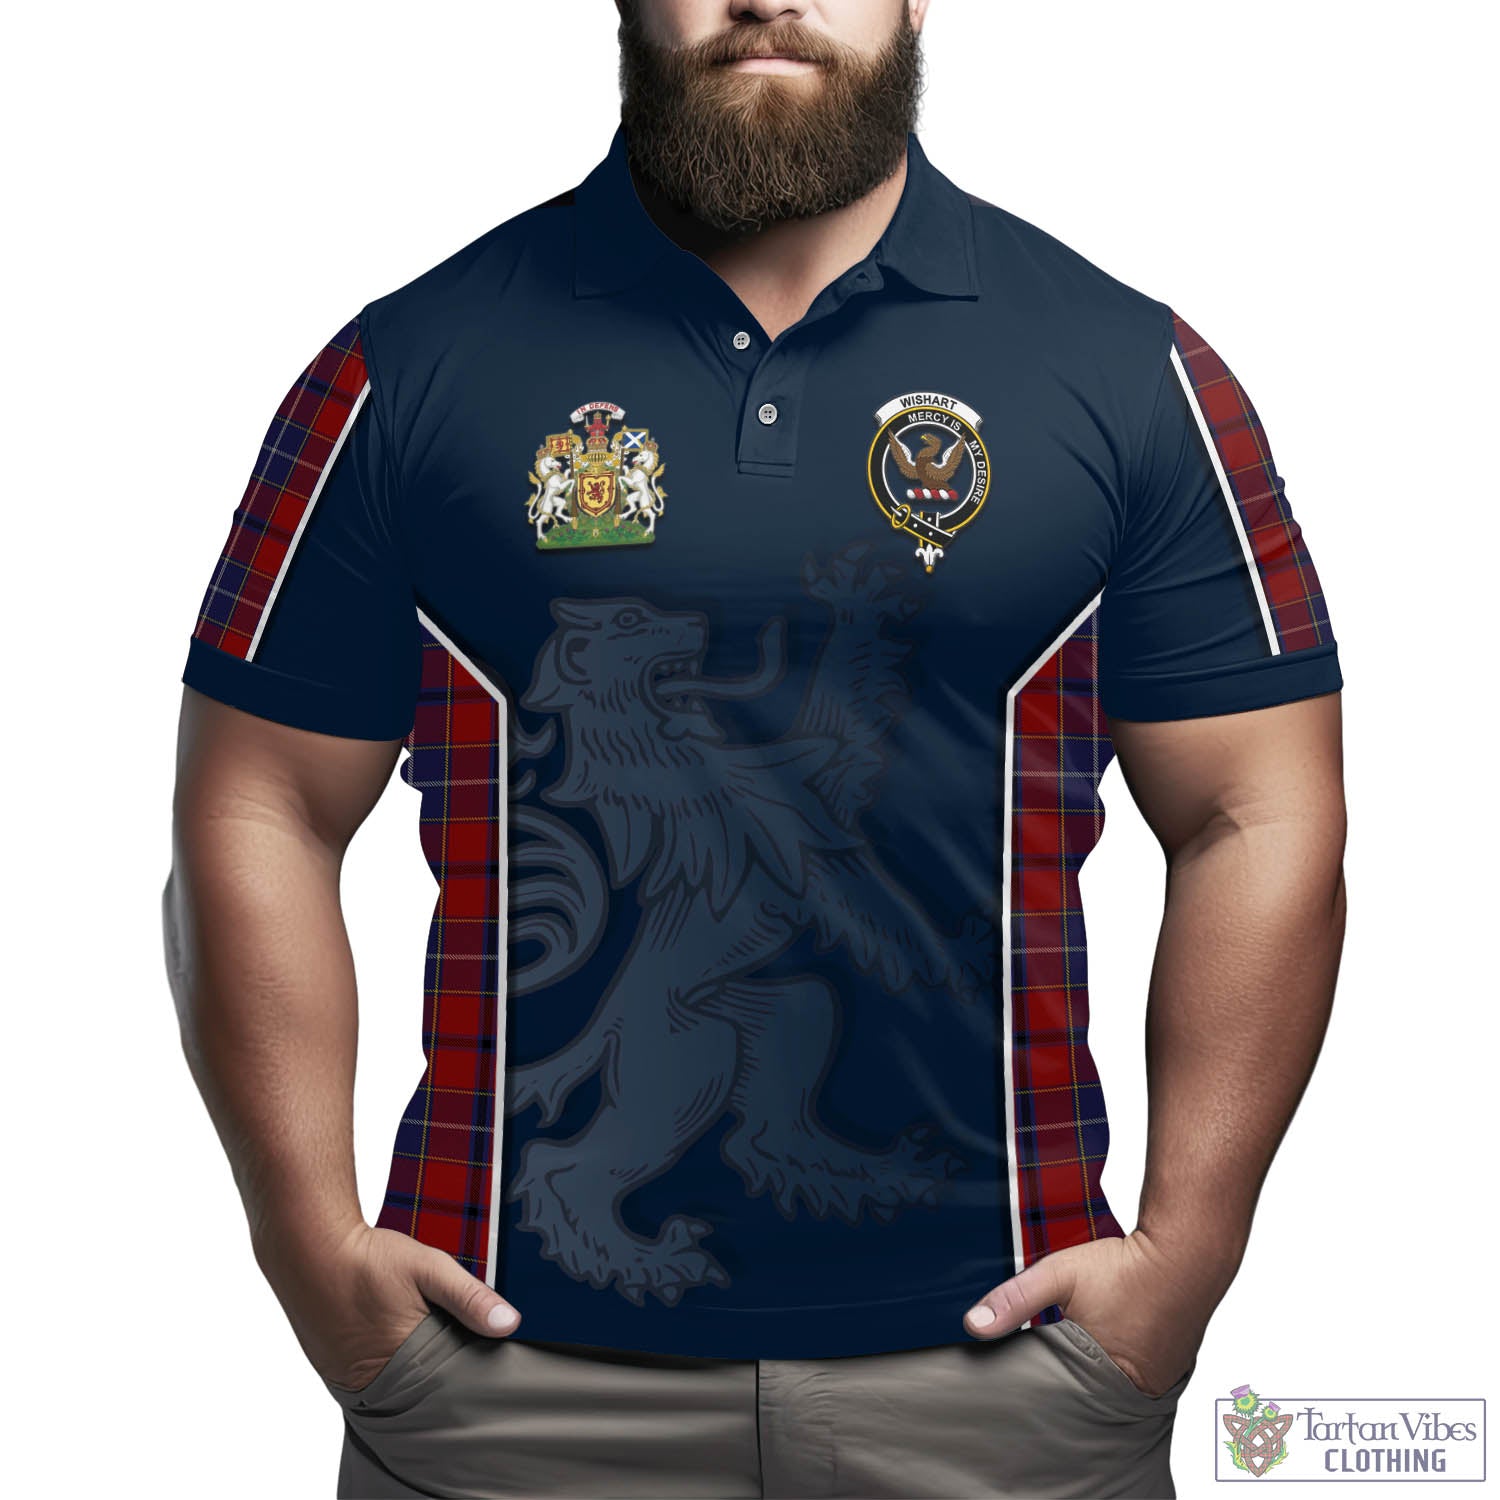 Tartan Vibes Clothing Wishart Dress Tartan Men's Polo Shirt with Family Crest and Lion Rampant Vibes Sport Style